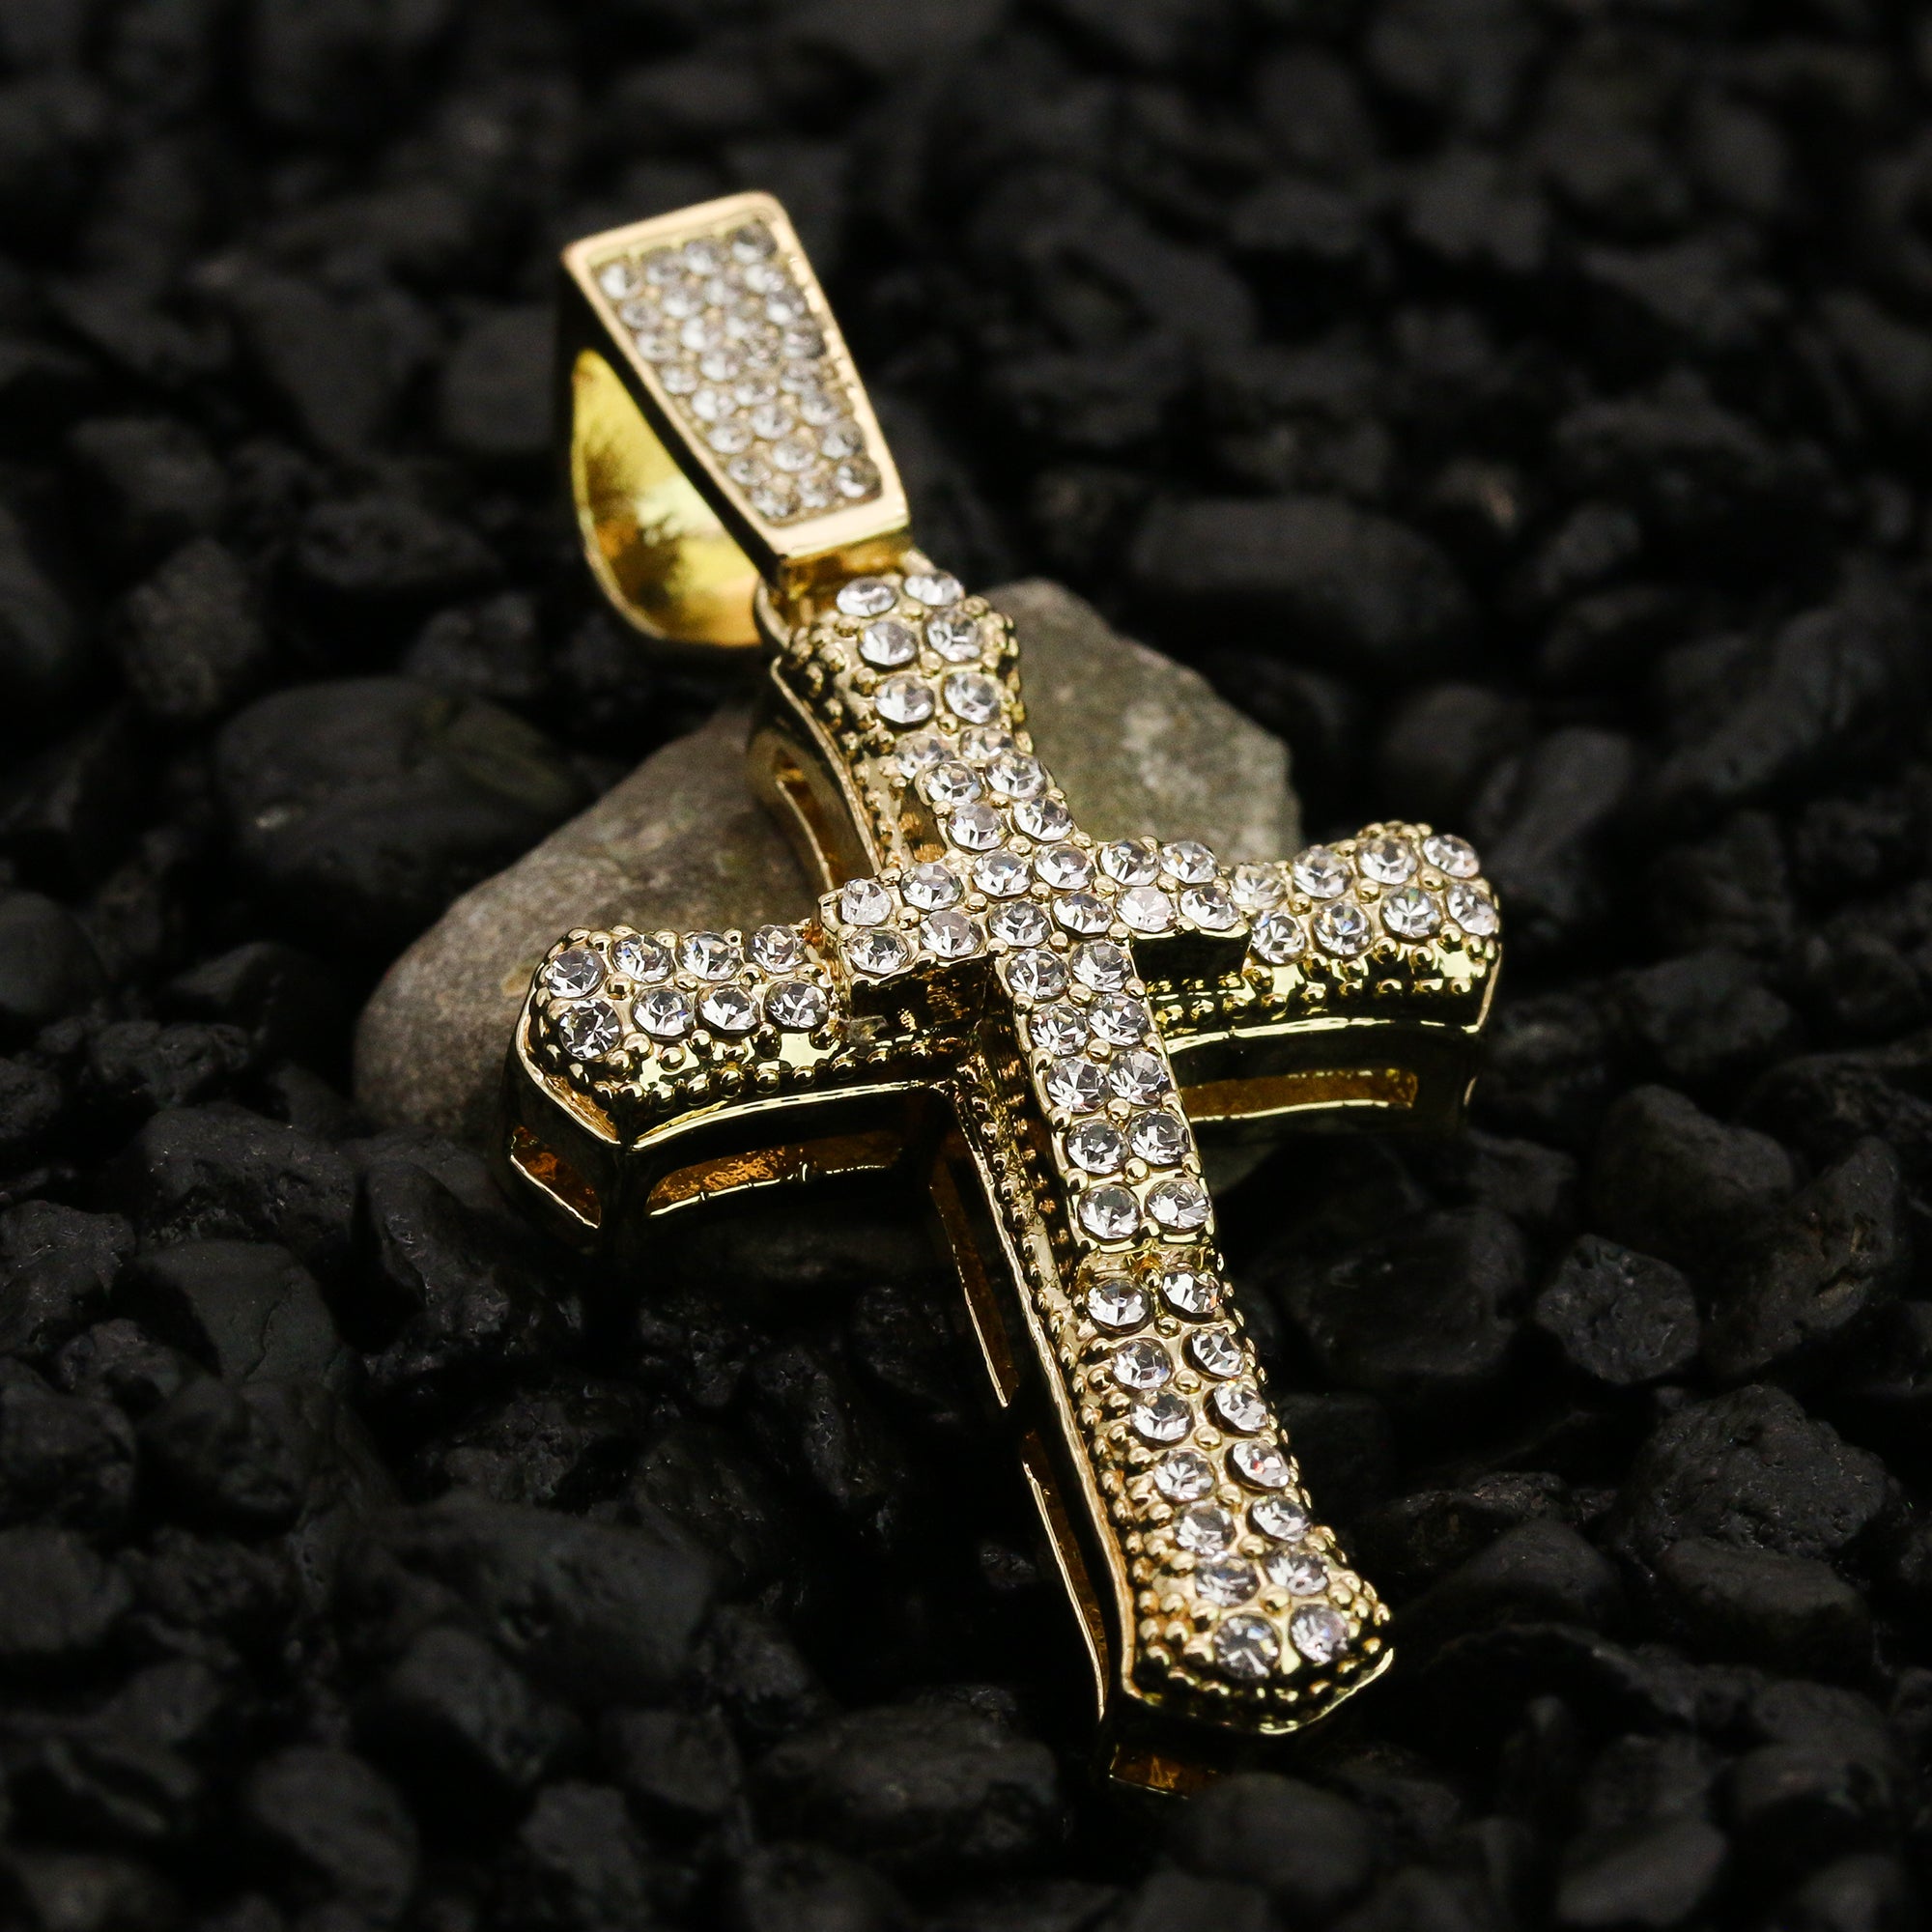 Sharp Two Cross Pendant 24" Rope Chain Hip Hop 18k Cz Jewelry Necklace